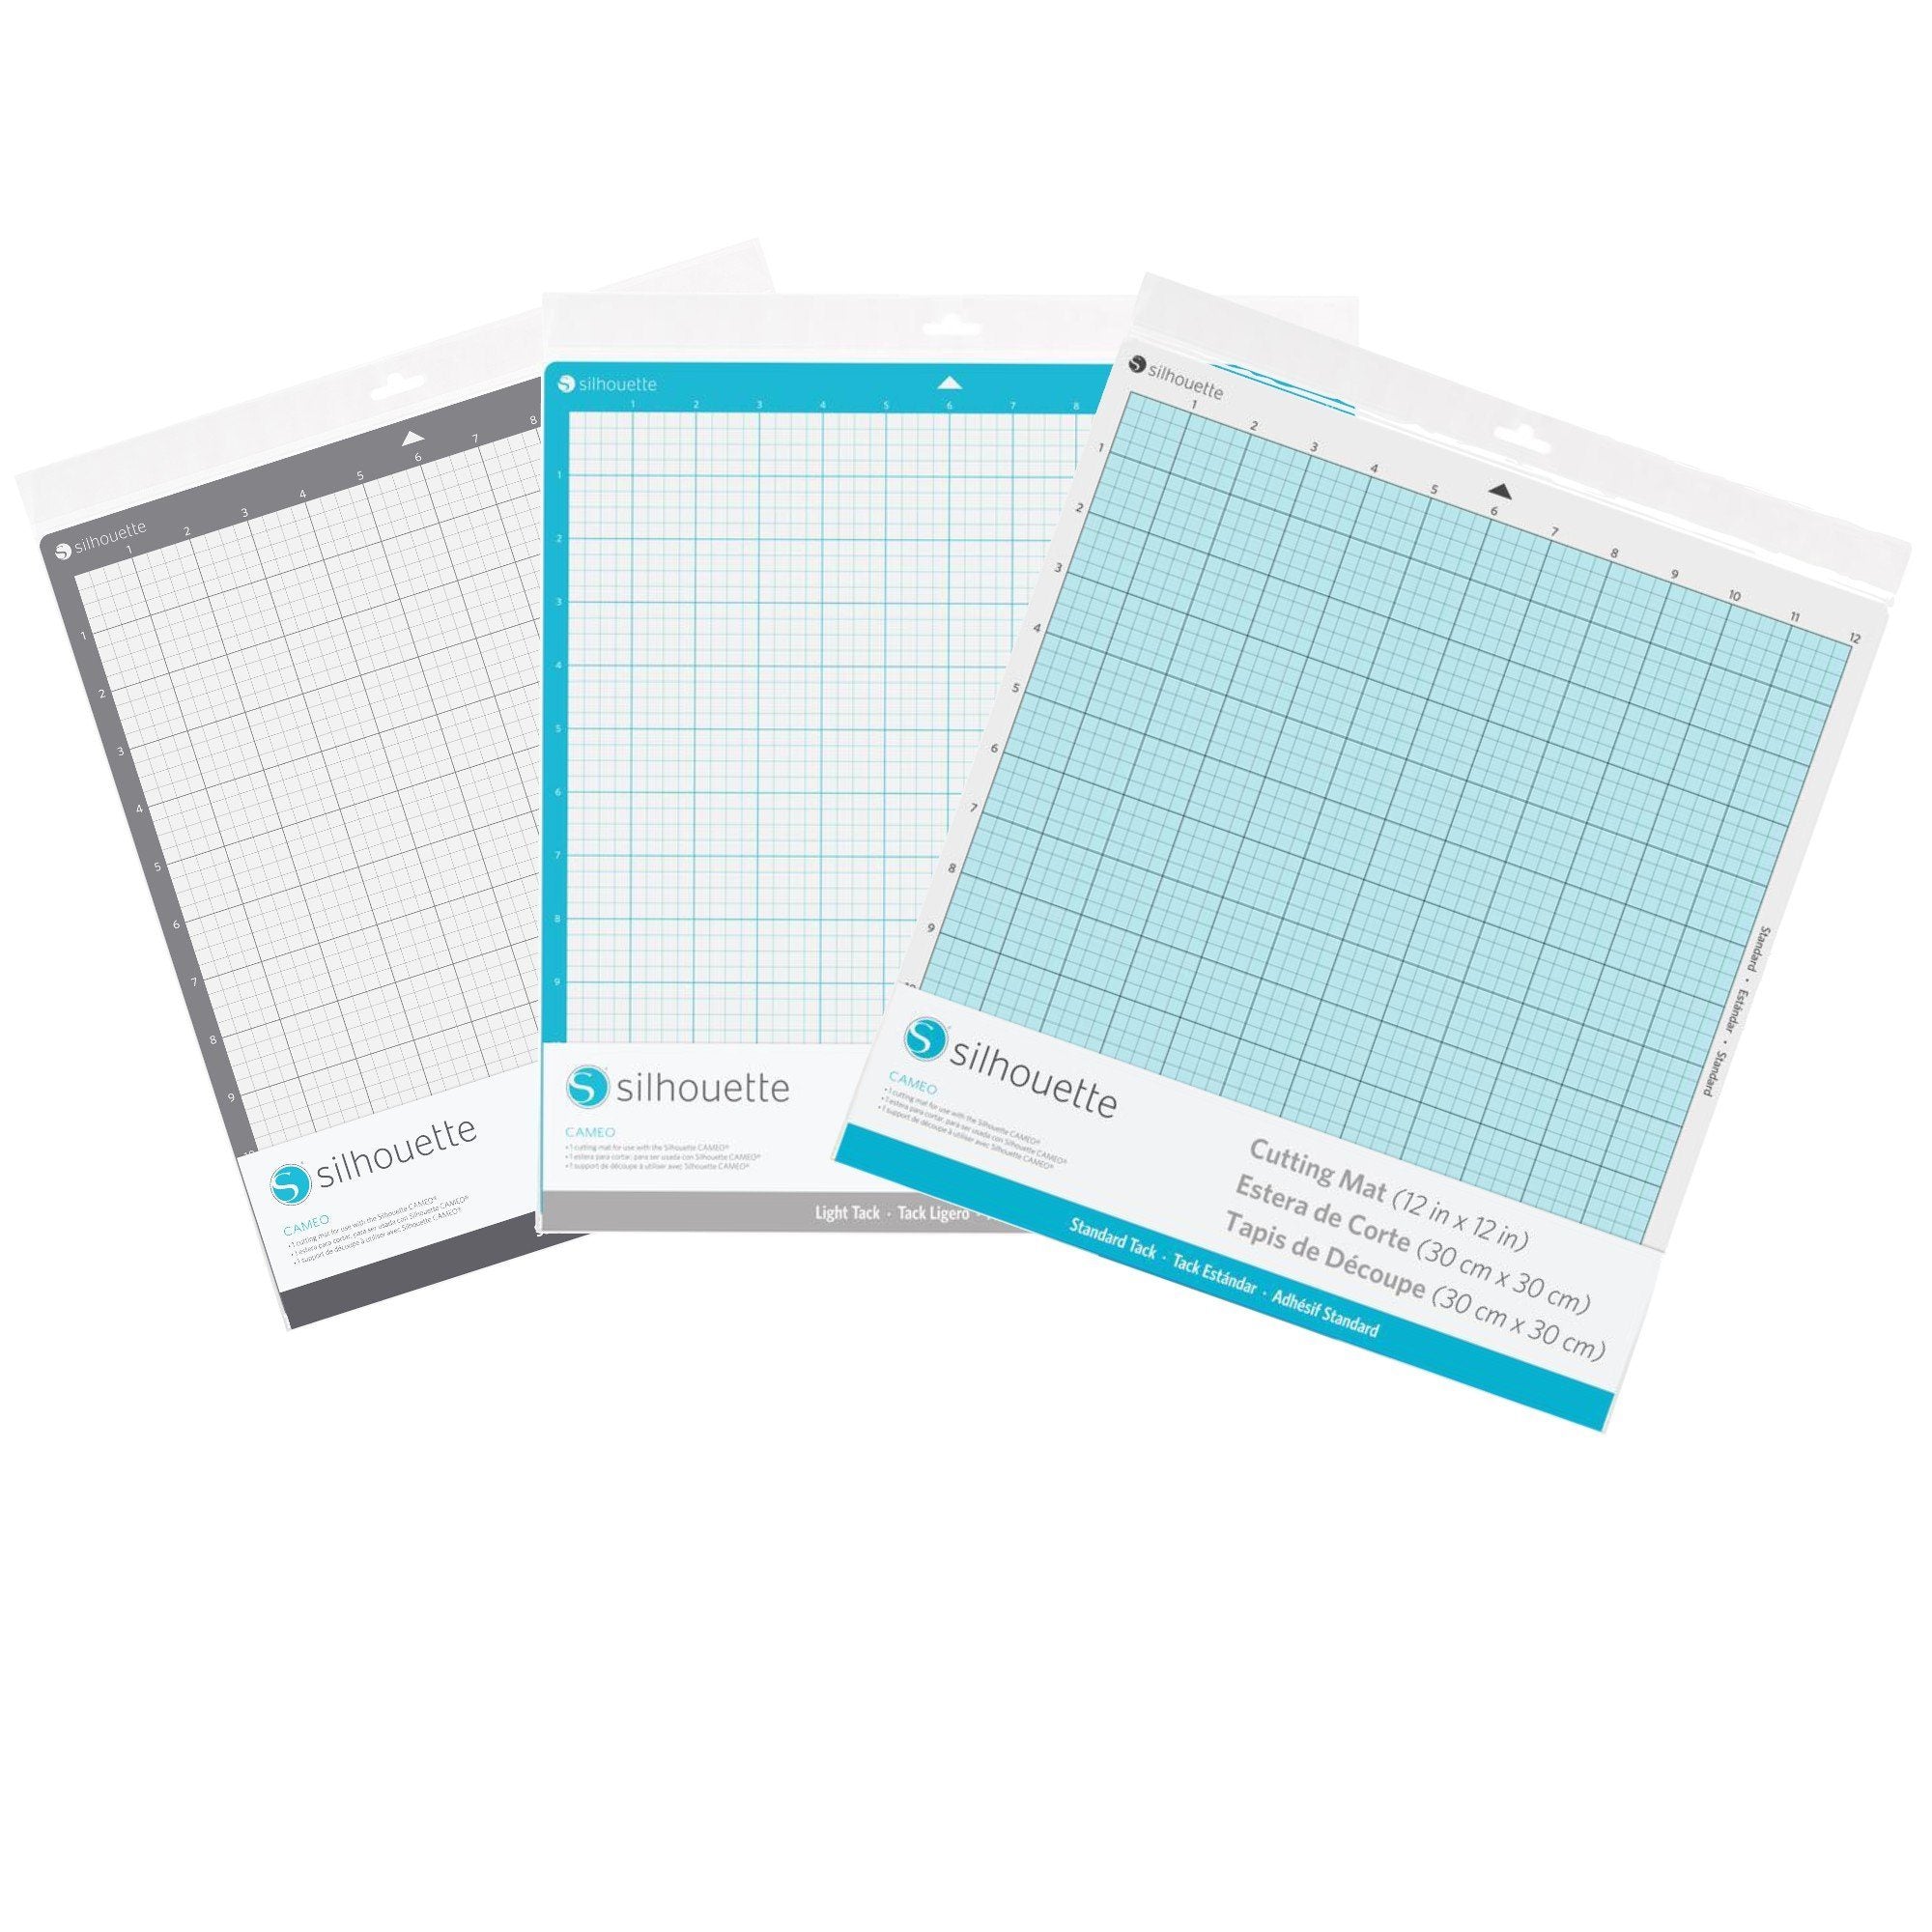 2 Silhouette Cameo Autoblades & 2 - 12 x 12 Cutting Mat Combo Pack